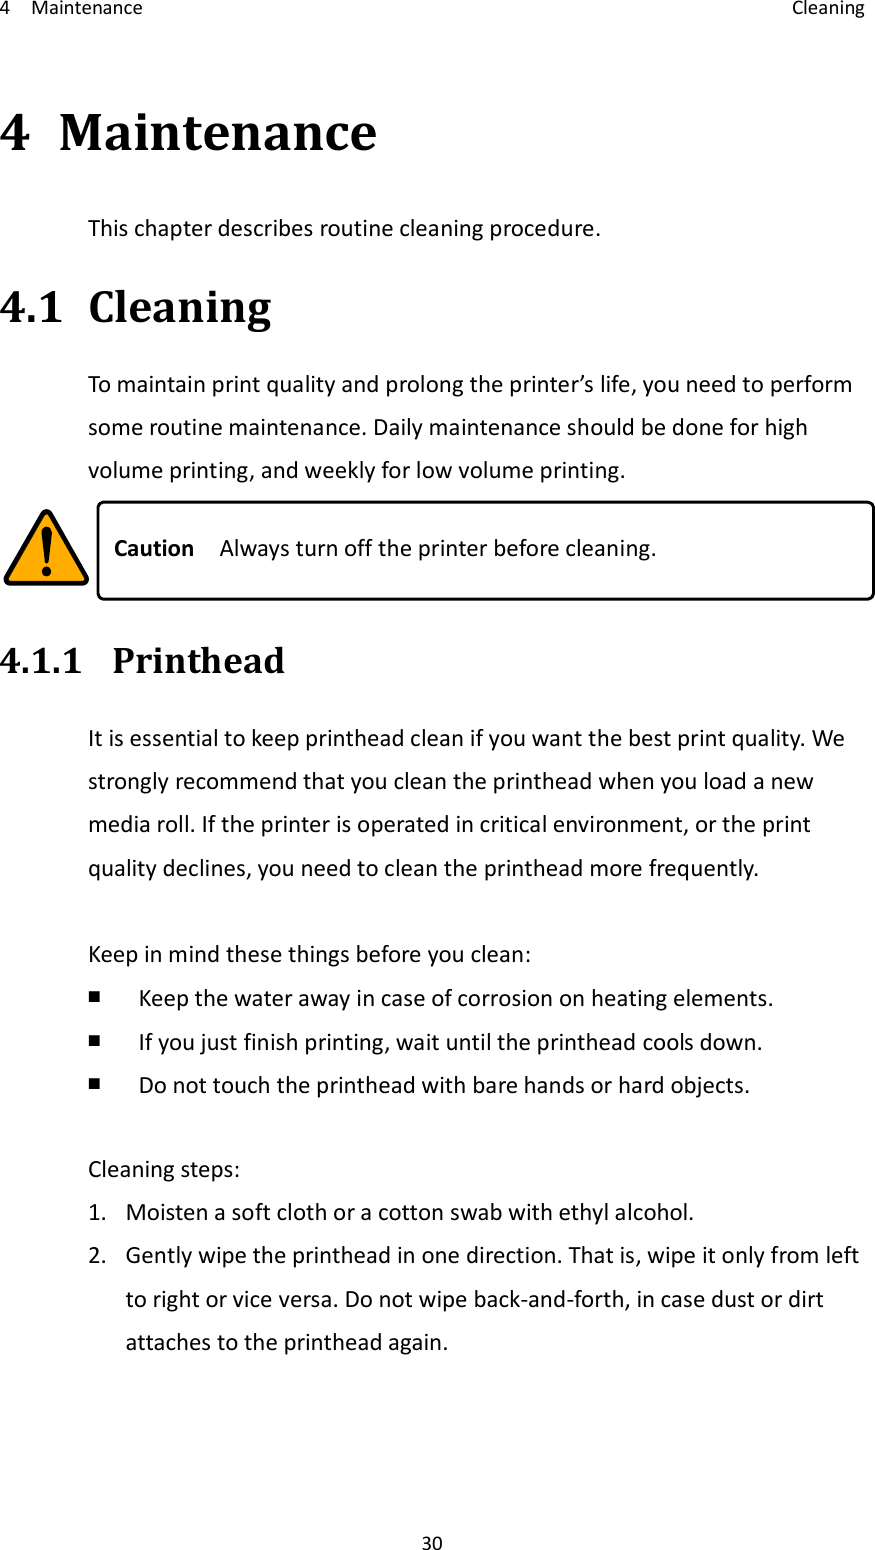 4    Maintenance    Cleaning 30 4 Maintenance This chapter describes routine cleaning procedure. 4.1 Cleaning To maintain print quality and prolong the printer’s life, you need to perform some routine maintenance. Daily maintenance should be done for high volume printing, and weekly for low volume printing.  Caution    Always turn off the printer before cleaning. 4.1.1 Printhead It is essential to keep printhead clean if you want the best print quality. We strongly recommend that you clean the printhead when you load a new media roll. If the printer is operated in critical environment, or the print quality declines, you need to clean the printhead more frequently.  Keep in mind these things before you clean: ￭ Keep the water away in case of corrosion on heating elements. ￭ If you just finish printing, wait until the printhead cools down. ￭ Do not touch the printhead with bare hands or hard objects.  Cleaning steps: 1. Moisten a soft cloth or a cotton swab with ethyl alcohol. 2. Gently wipe the printhead in one direction. That is, wipe it only from left to right or vice versa. Do not wipe back-and-forth, in case dust or dirt attaches to the printhead again.  